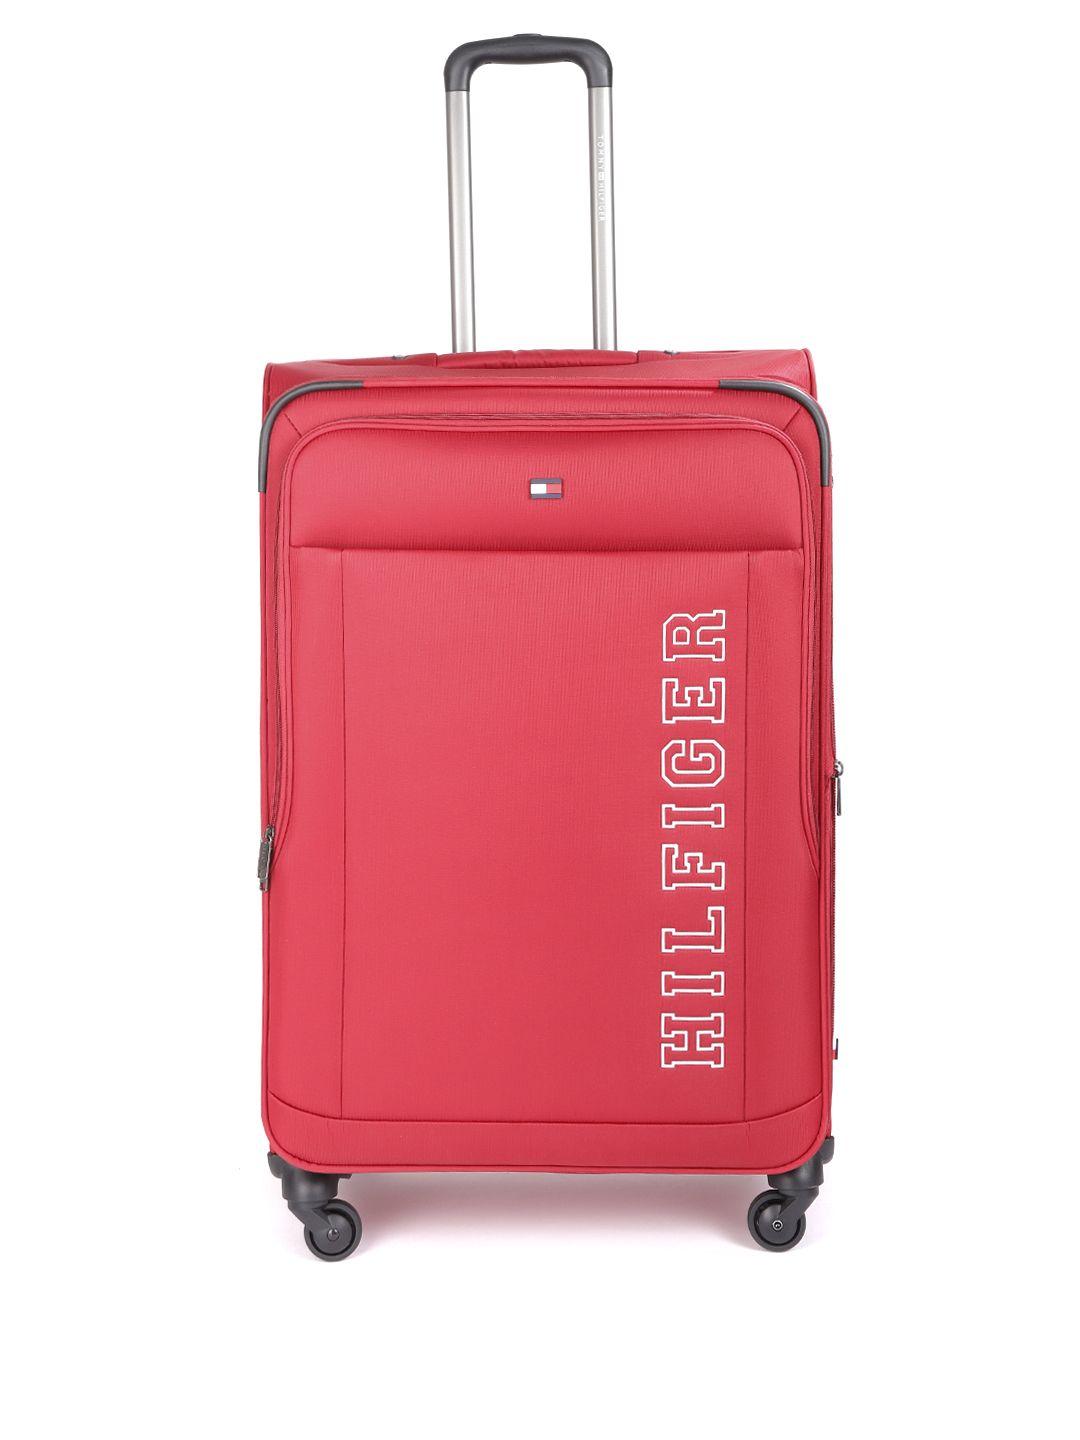 tommy hilfiger unisex red soft luggage 4-wheel 360-degree rotation large trolley suitcase